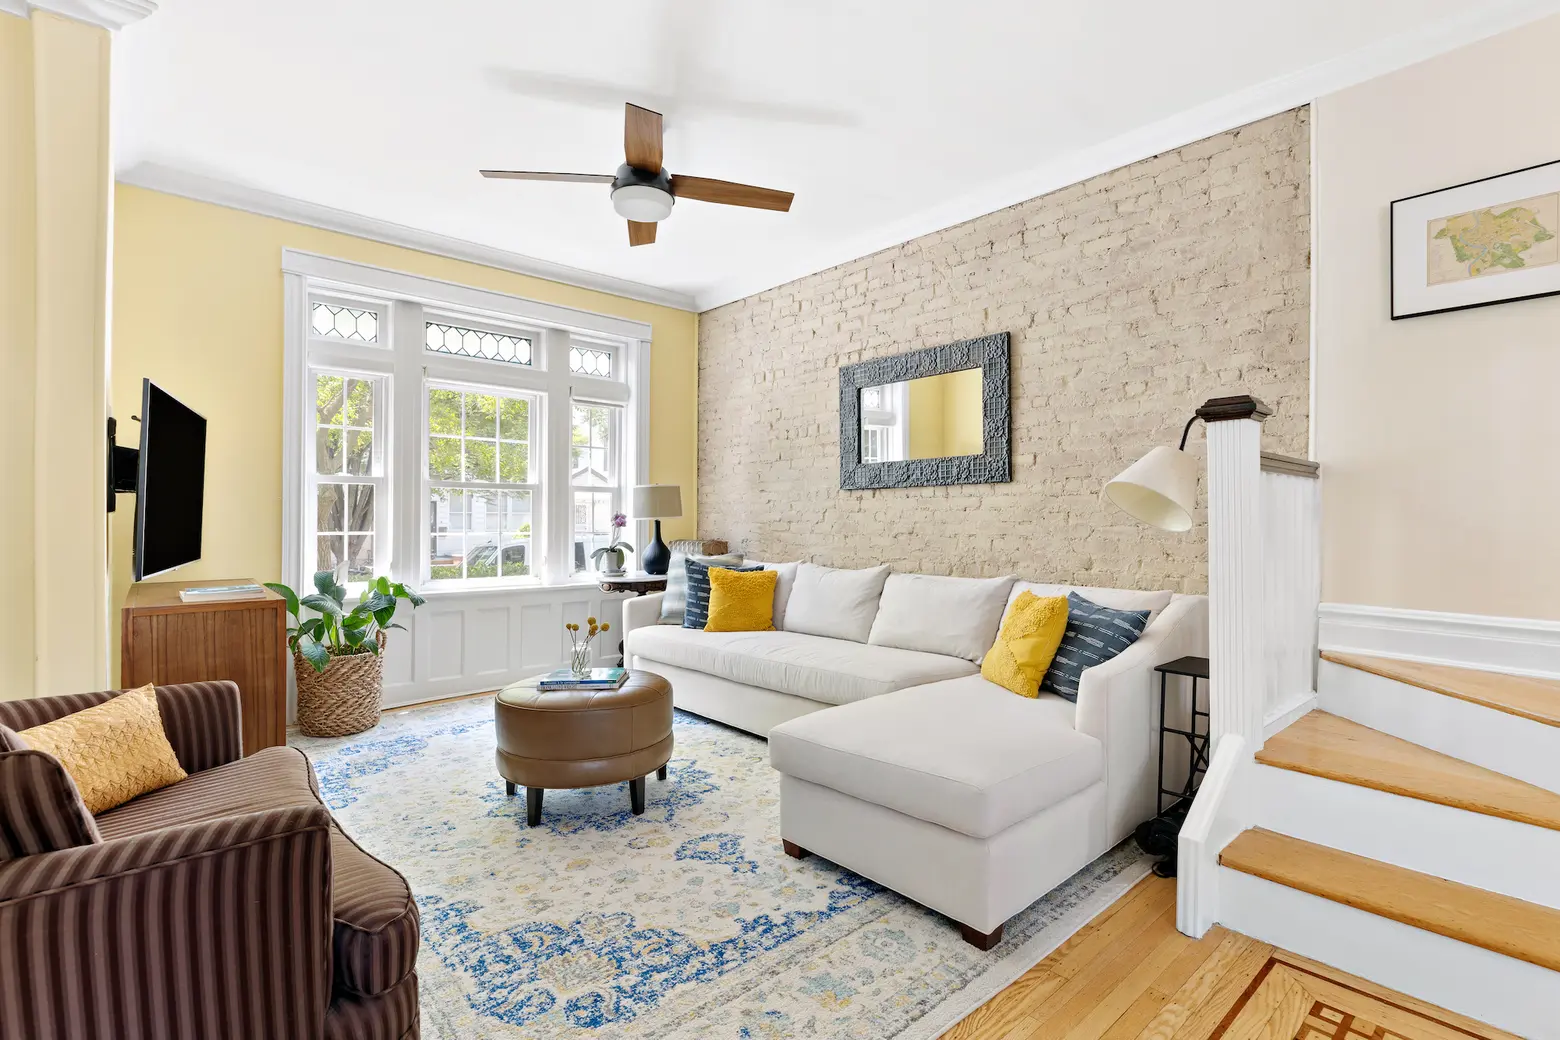 For $1.25M, an attached house in Bay Ridge with sunny interiors and a lush backyard